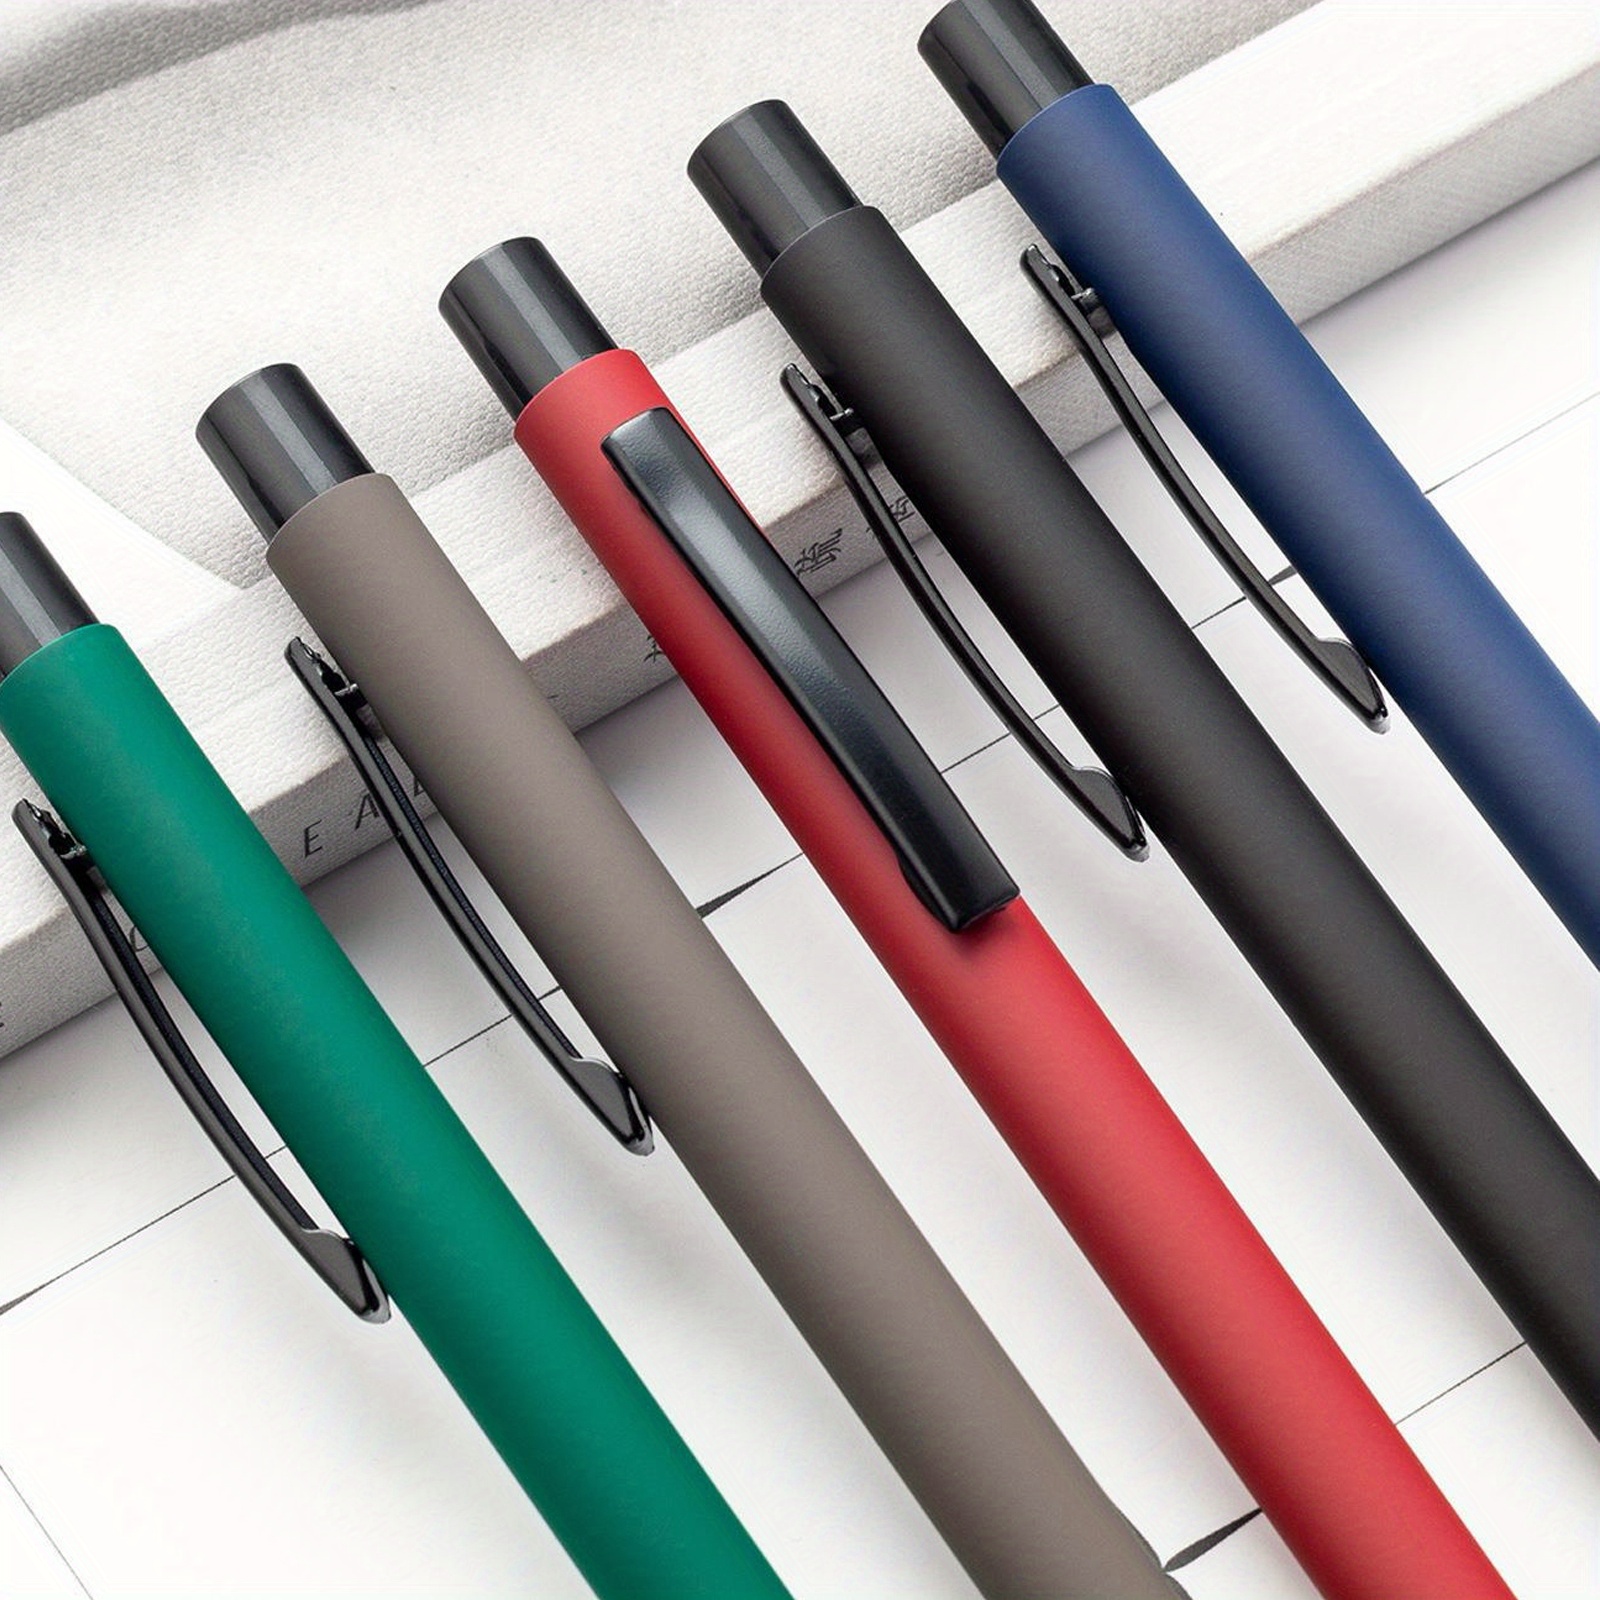  Insect Ballpoint Pen Retractable Work Pens for Men Women Office  Gift 4 PCS : Office Products